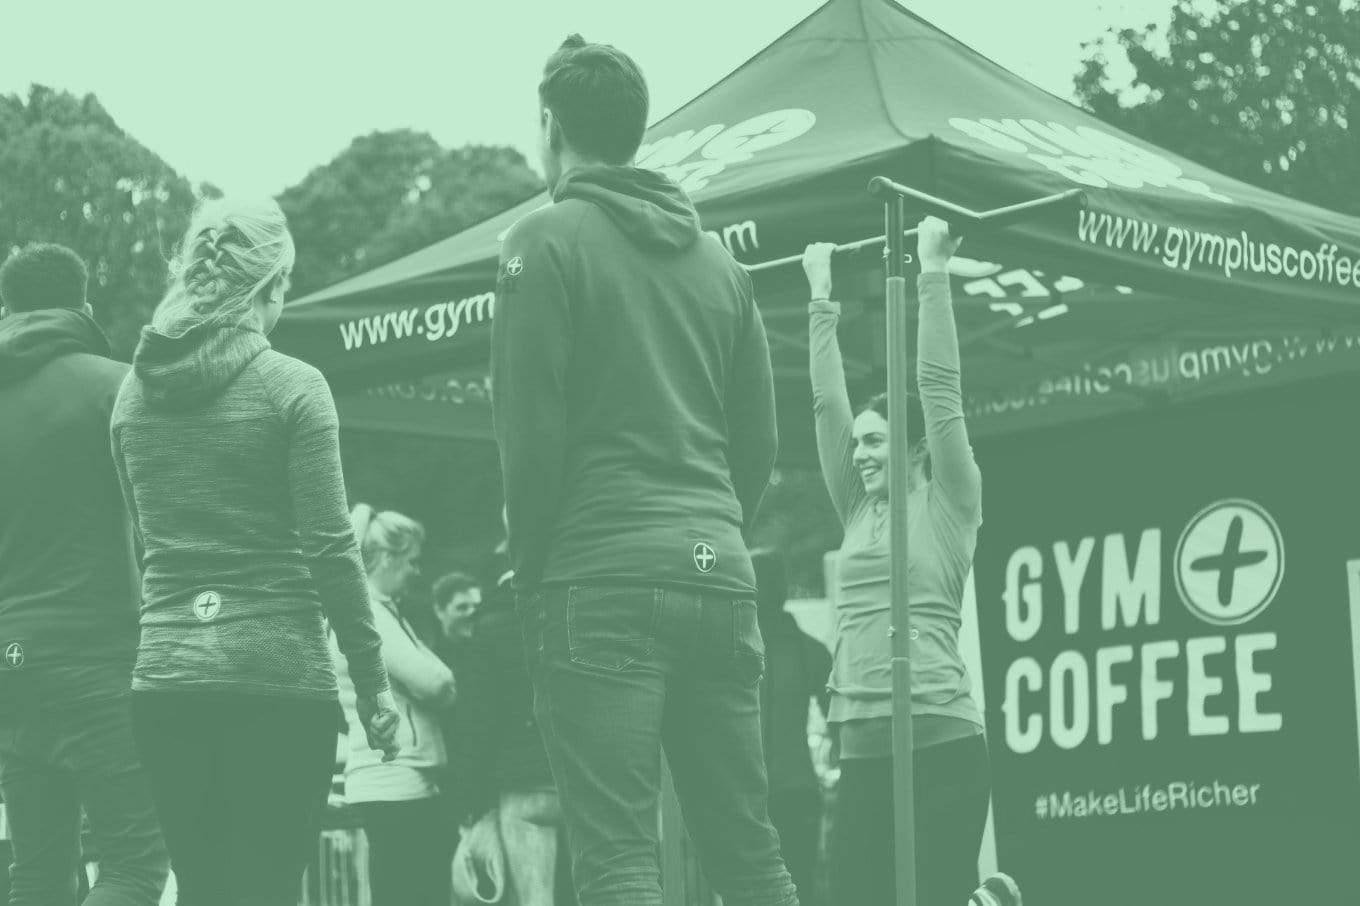 Official Clothing Partner to Wellfest 2018 - Gym+Coffee